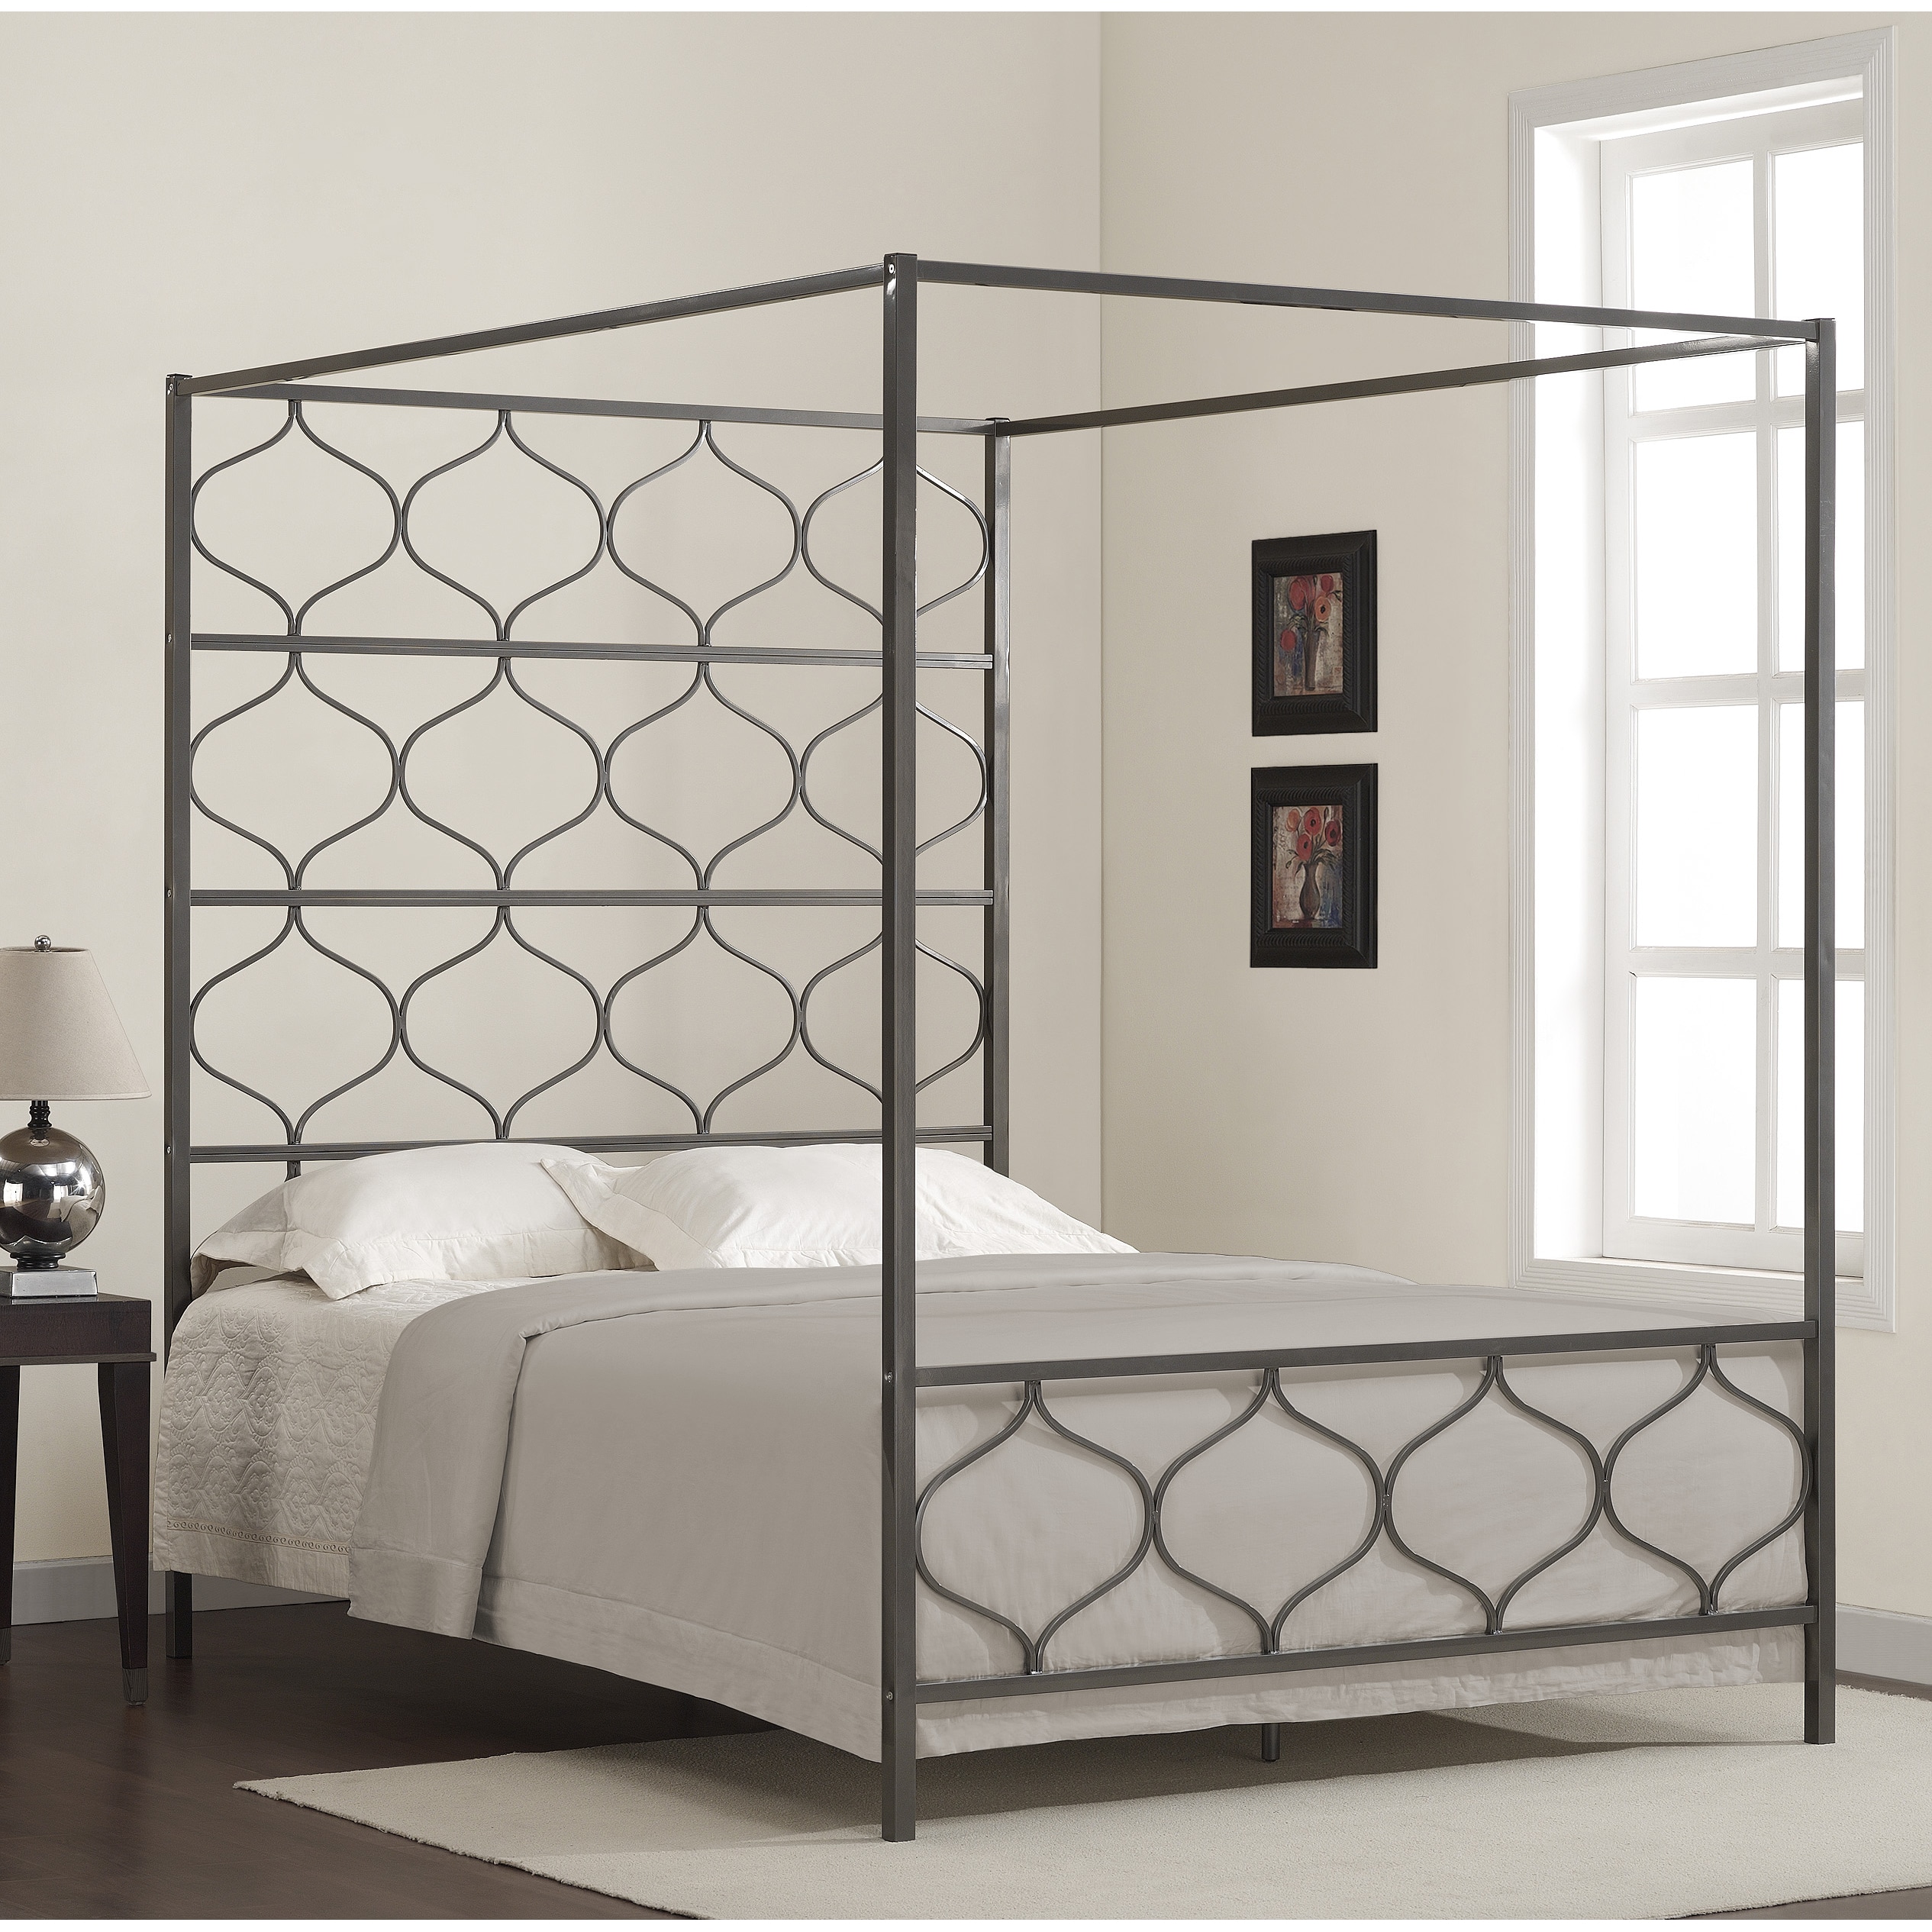 Marnie Queen Canopy Bed